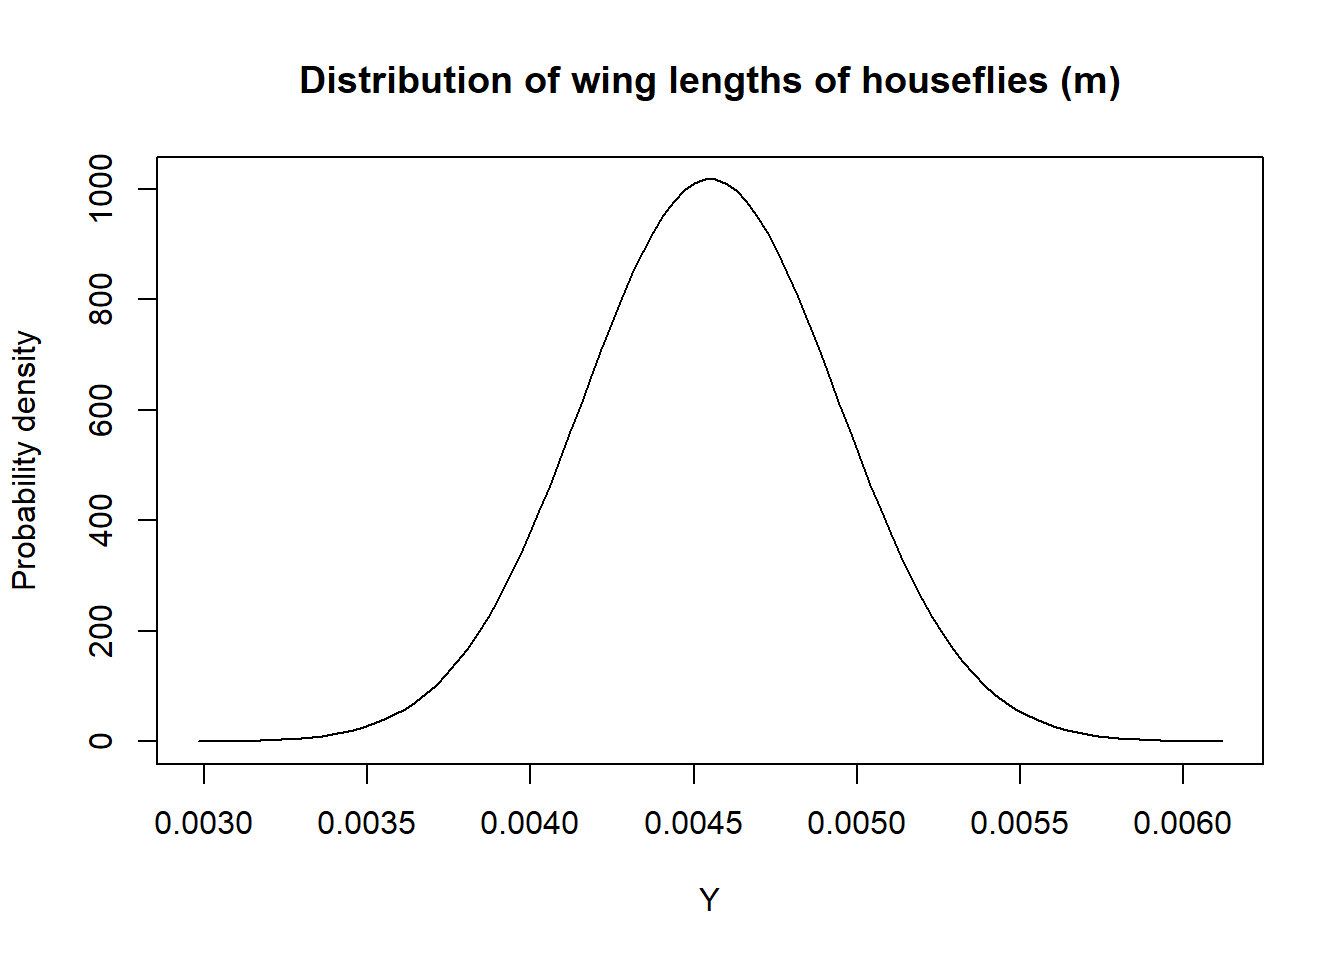 Distribution of wing-lengths for common houseflies in meters.